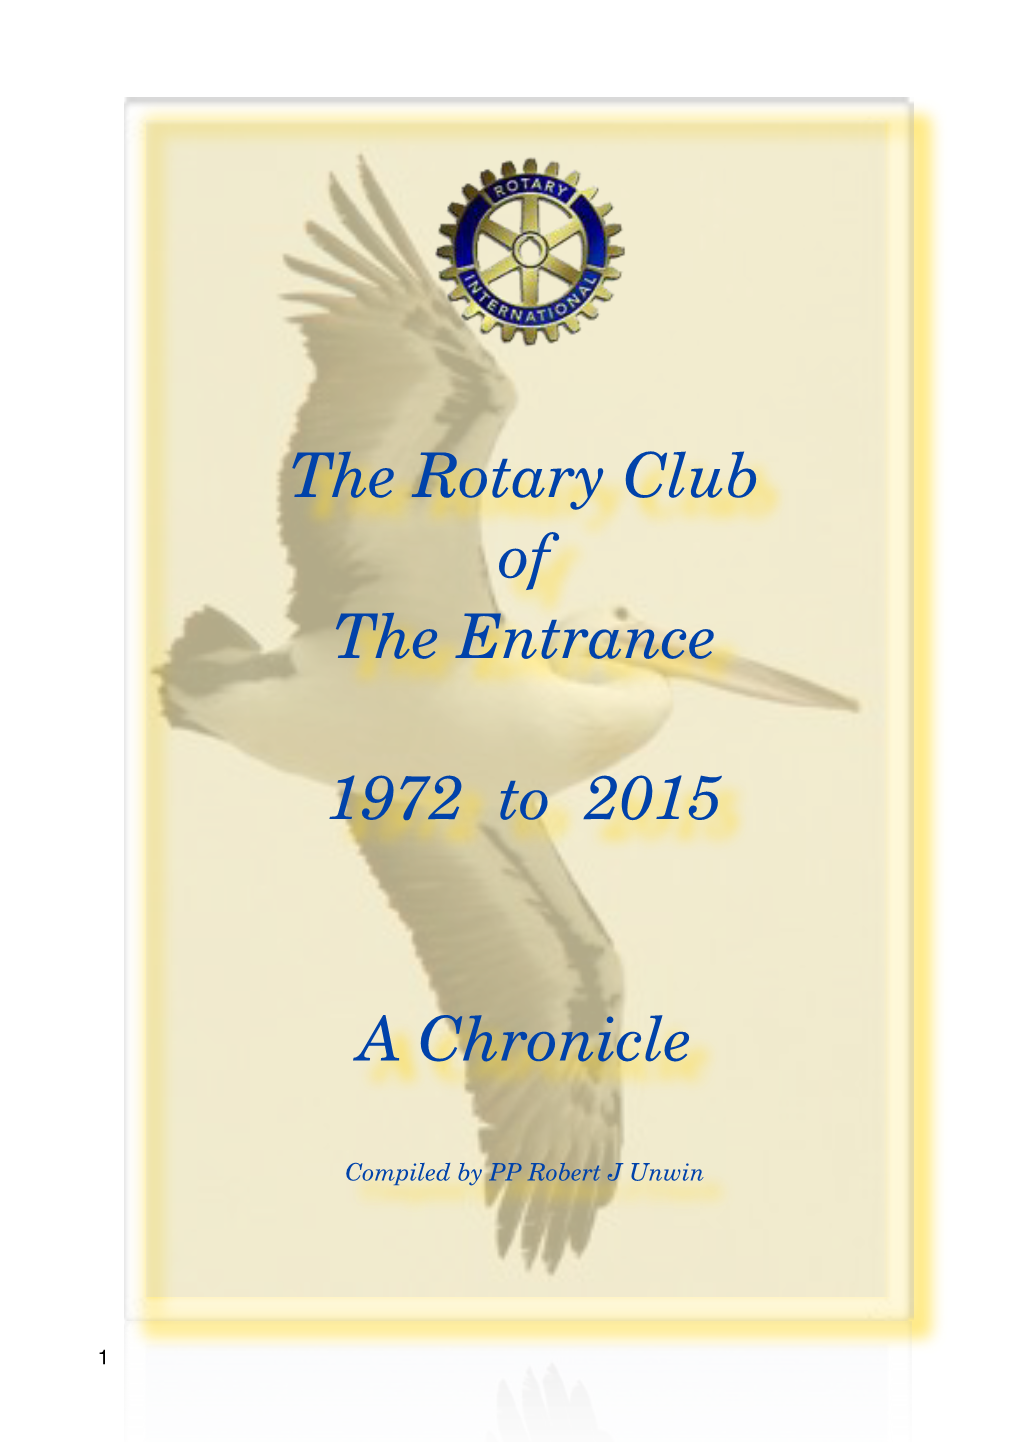 The History of the Rotary Club of the Entrance Inc. 1972 to 2015 Compiled by PP Robert J Unwin